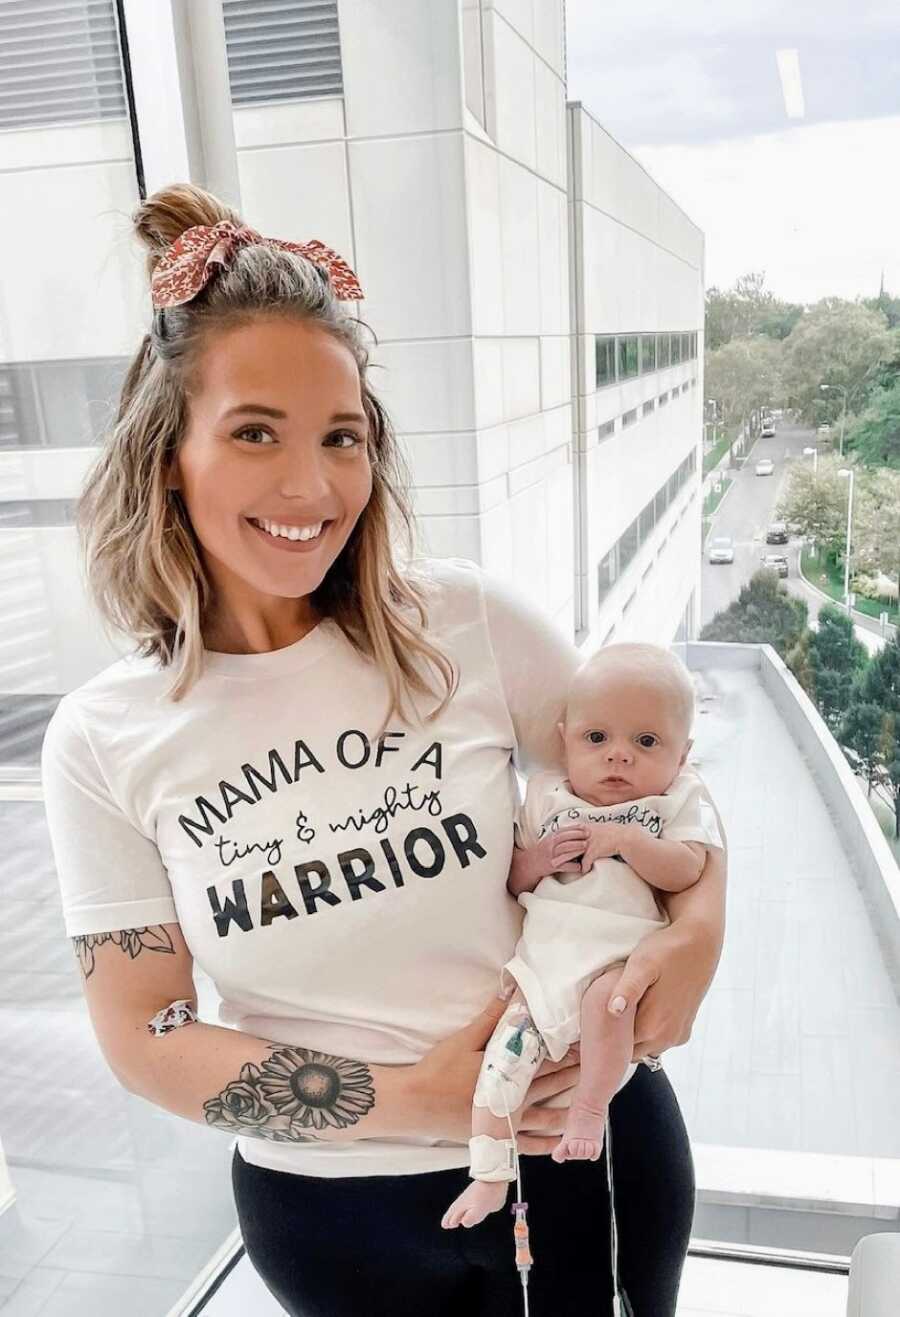 Mom holds her newborn son, a preemie and NICU warrior, in the hospital wearing matching "tiny & mighty warrior" shirts